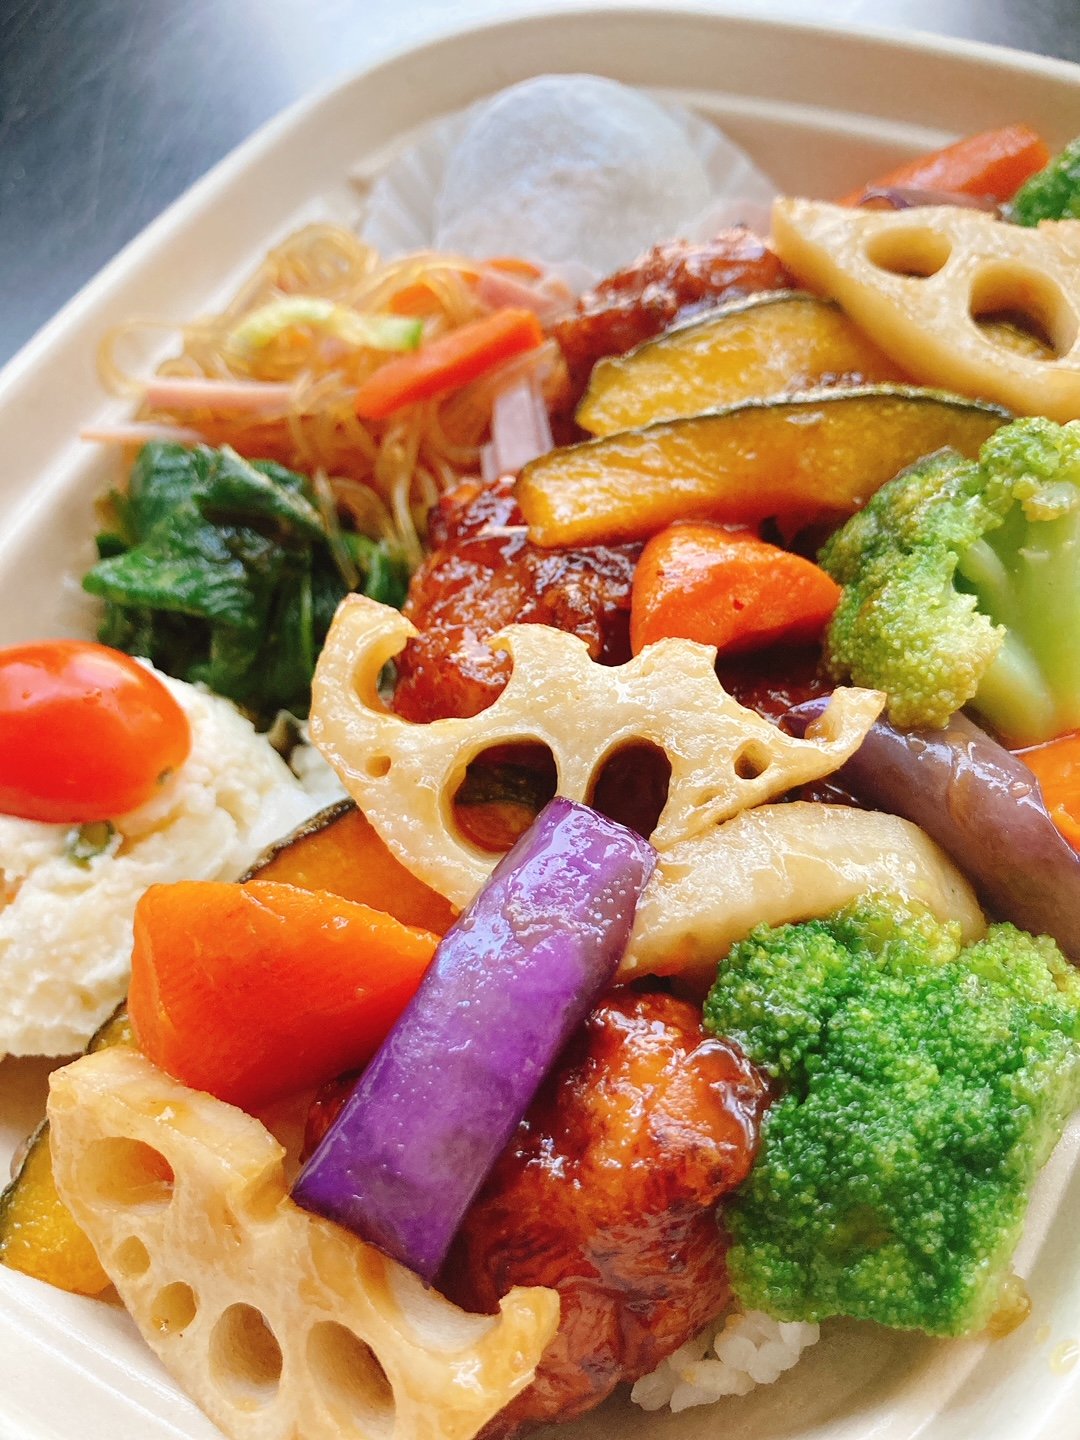 Chicken sweet and sour bento box.JPG